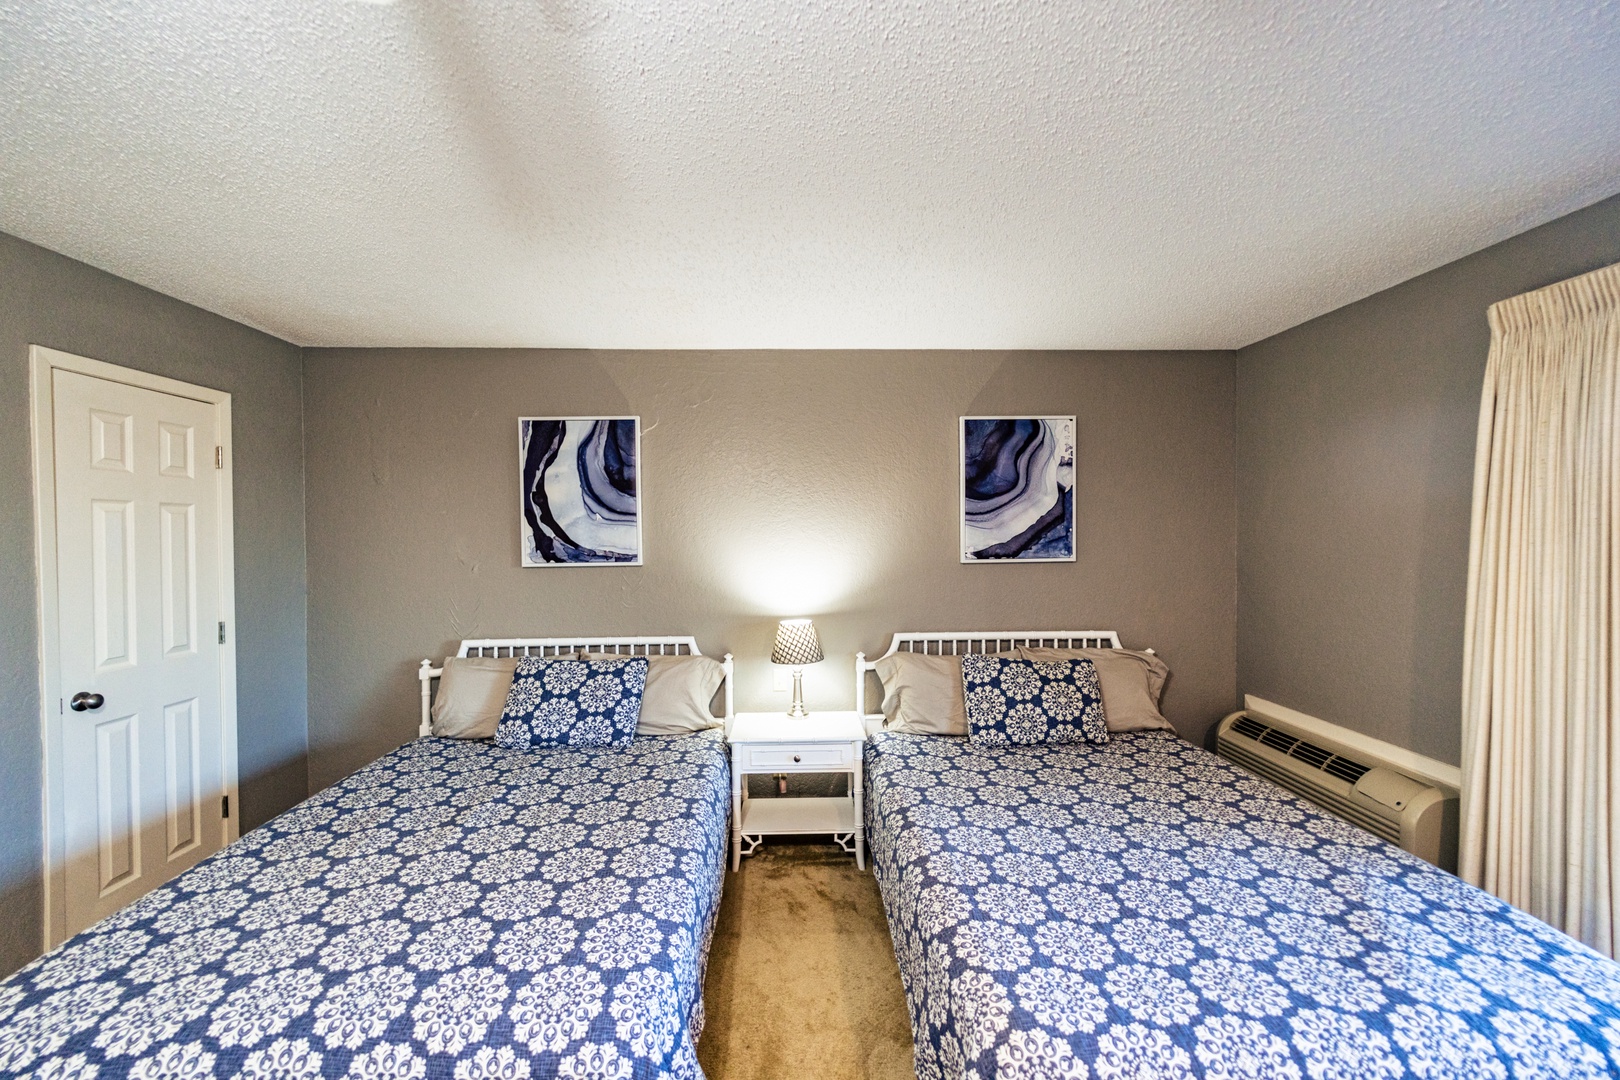 This lower-level suite offers a pair of queen beds, ensuite, Smart TV, & deck access